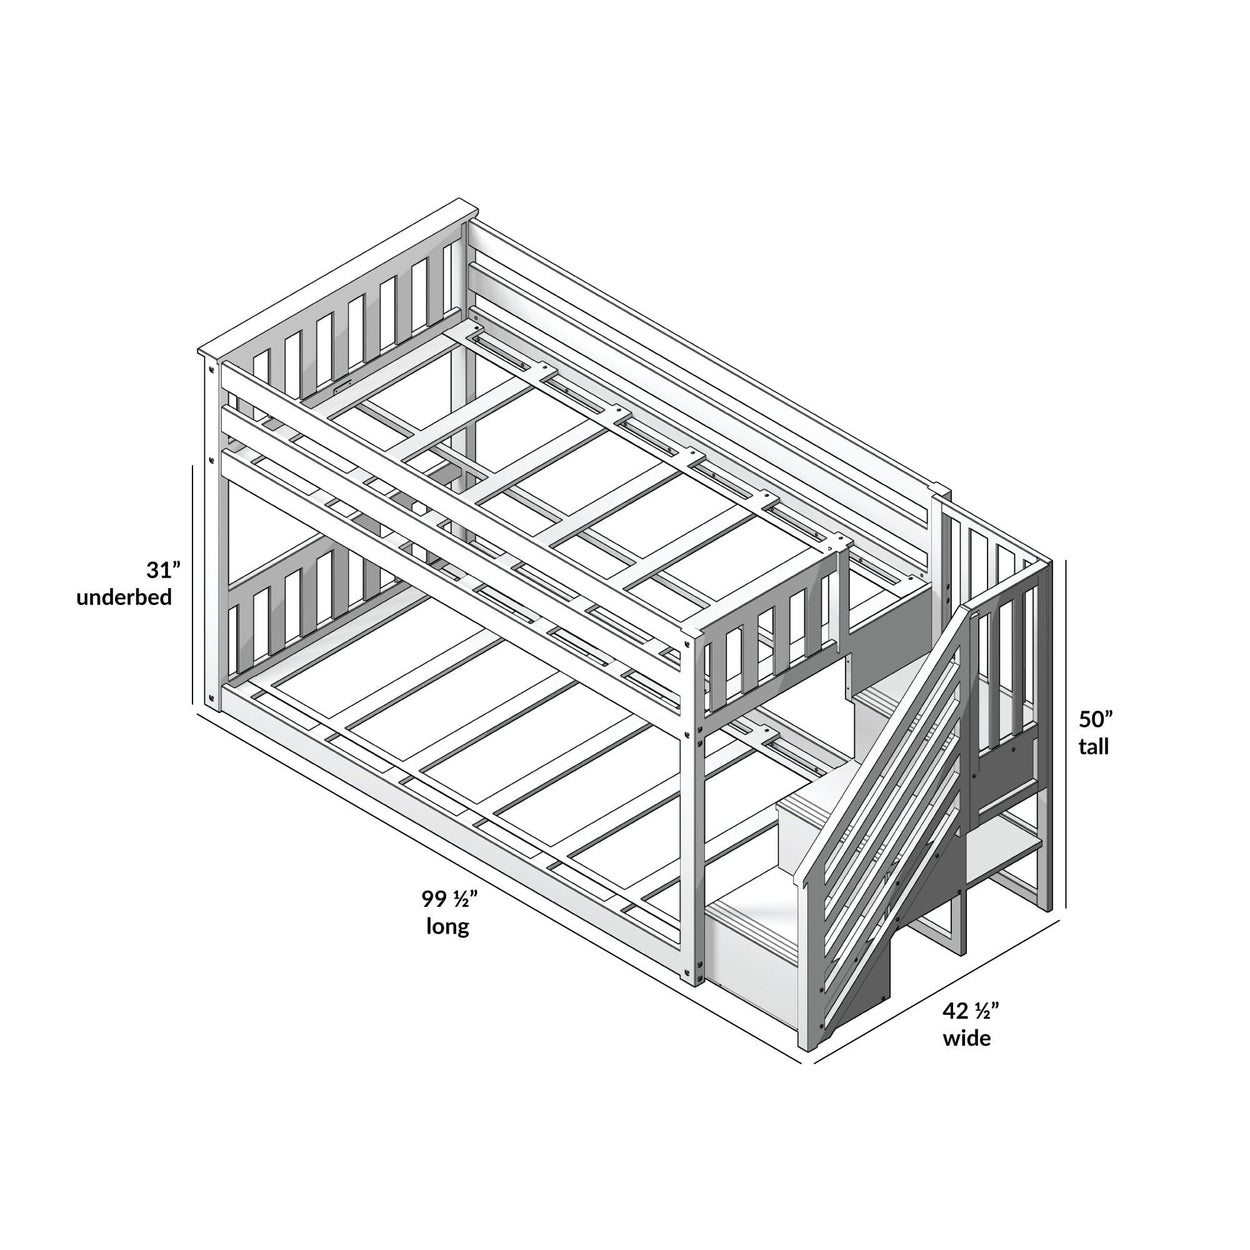 185220151309 : Bunk Beds Low Bunk with Stairs and Three Guard Rails, Clay